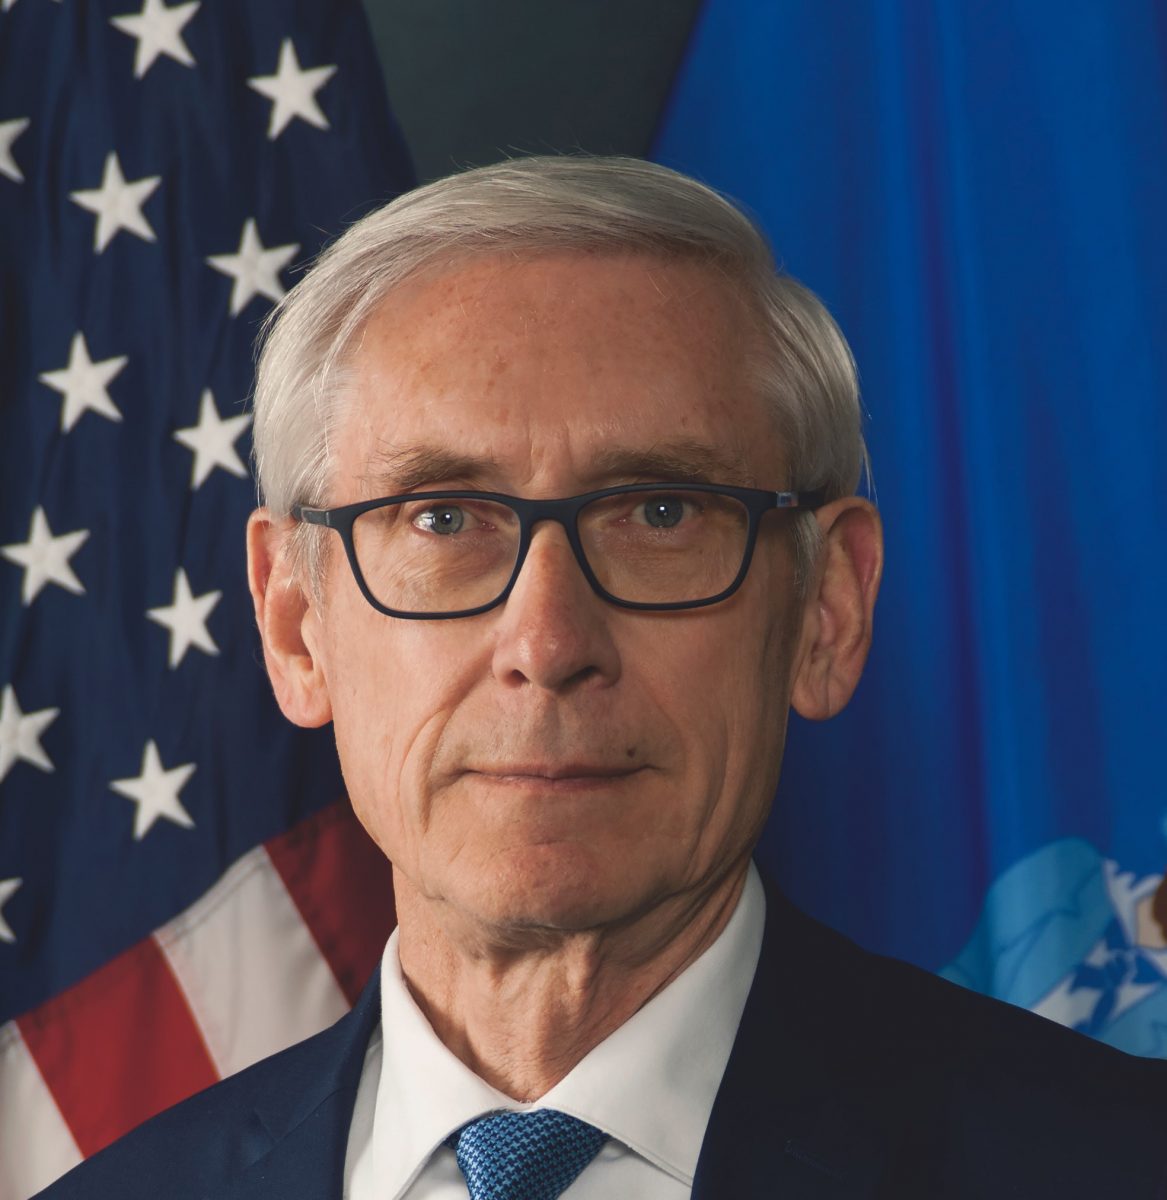 Gov. Evers announces statewide ban on evictions and foreclosures